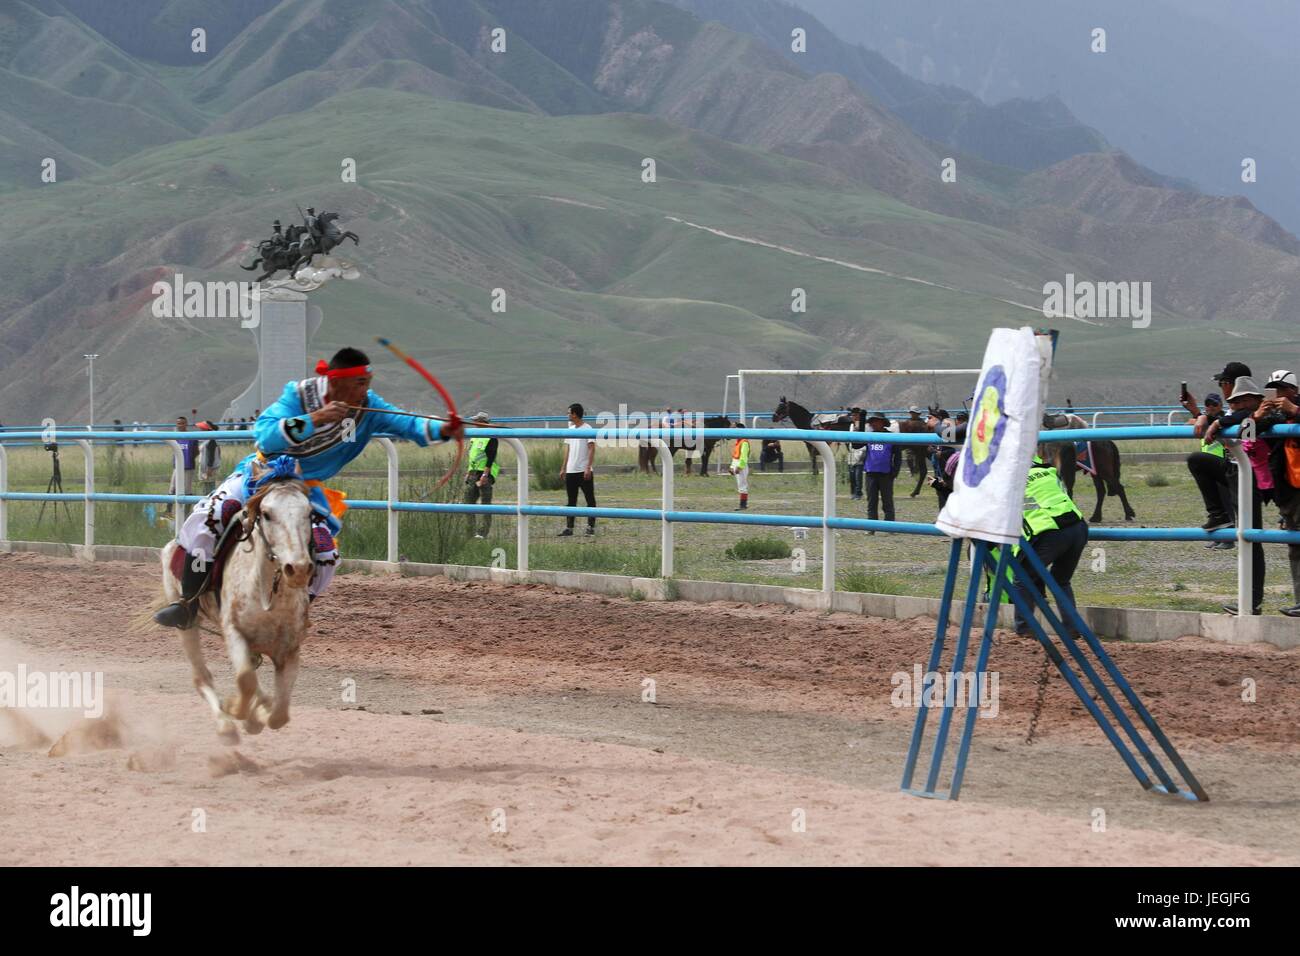 Zhangye, China's Gansu Province. 24th June, 2017. A competitor performs horseback archery during a horse racing event in Sunan County, northwest China's Gansu Province, June 24, 2017. Credit: Cheng Lin/Xinhua/Alamy Live News Stock Photo